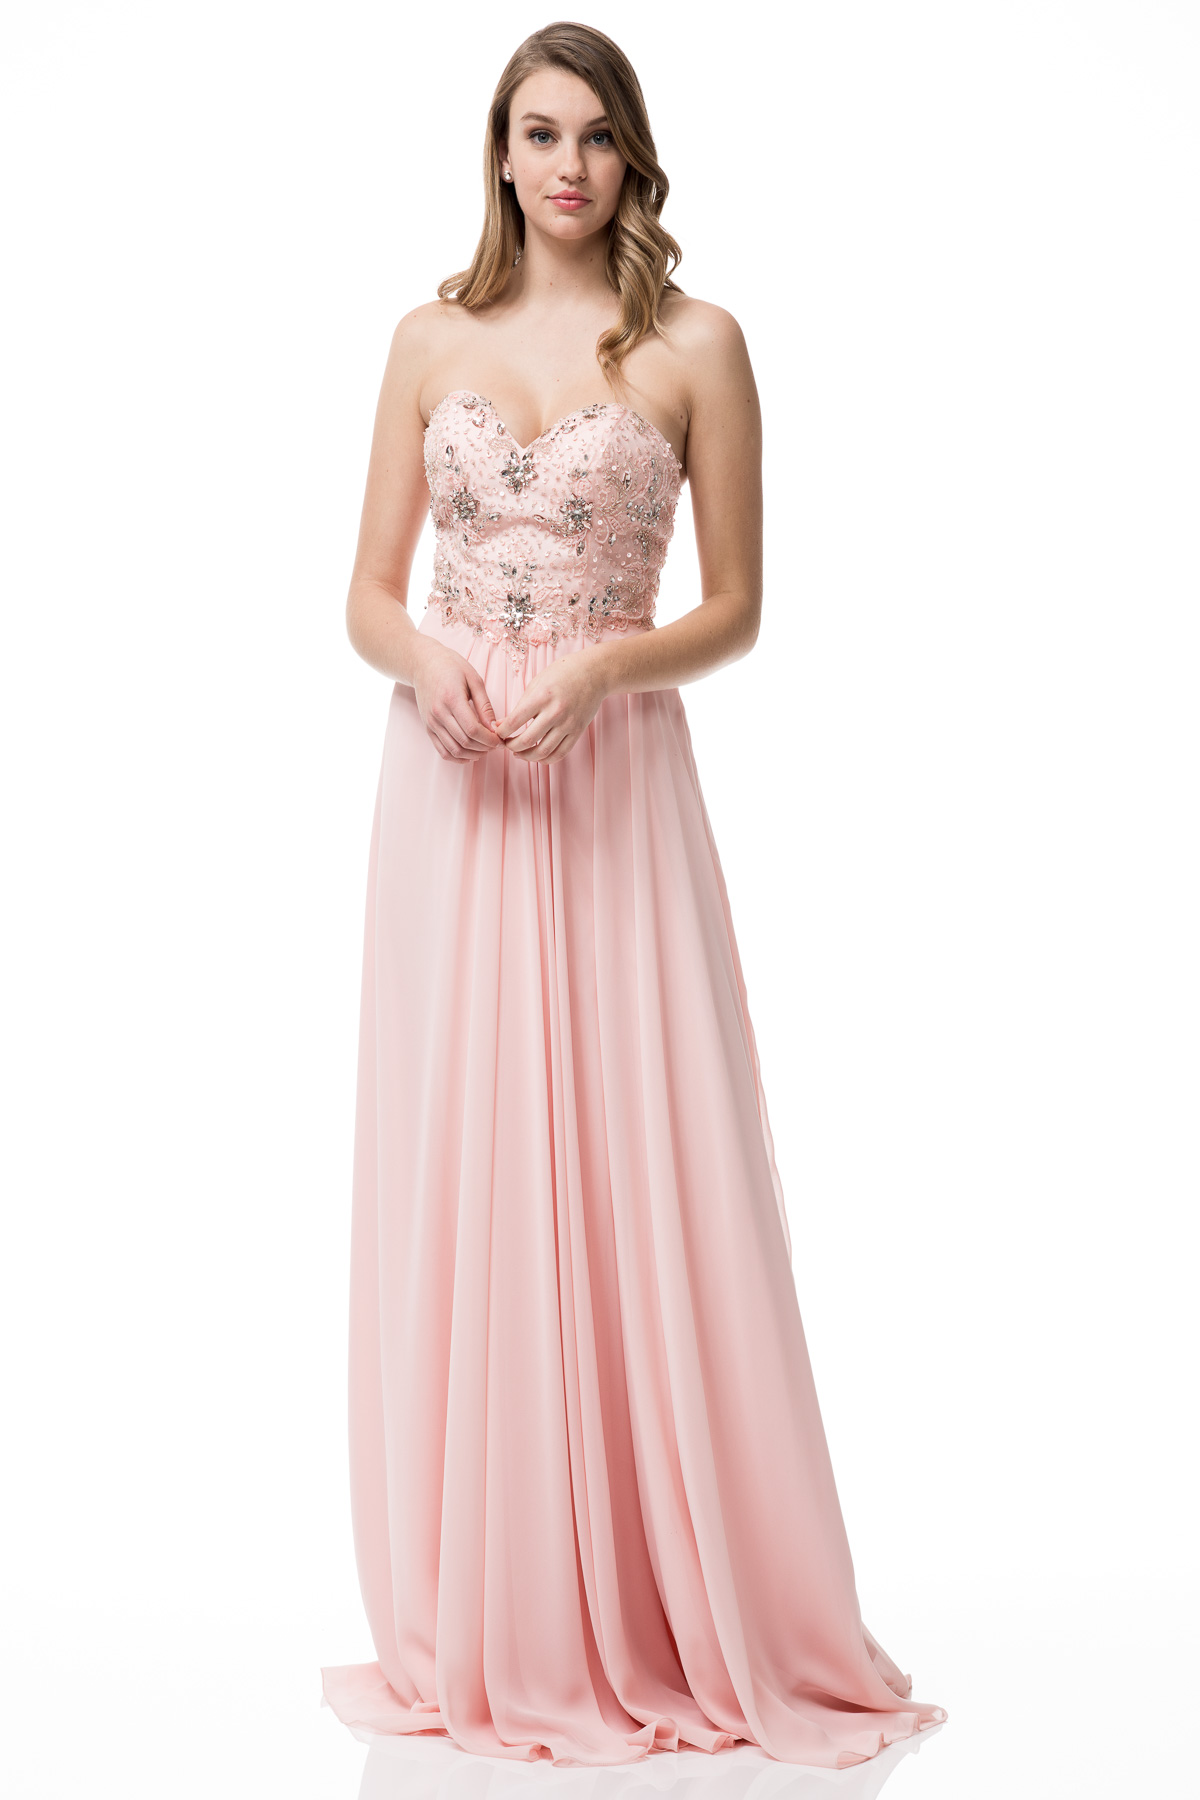 STRAPLESS, SWEETHEART, A-LINE